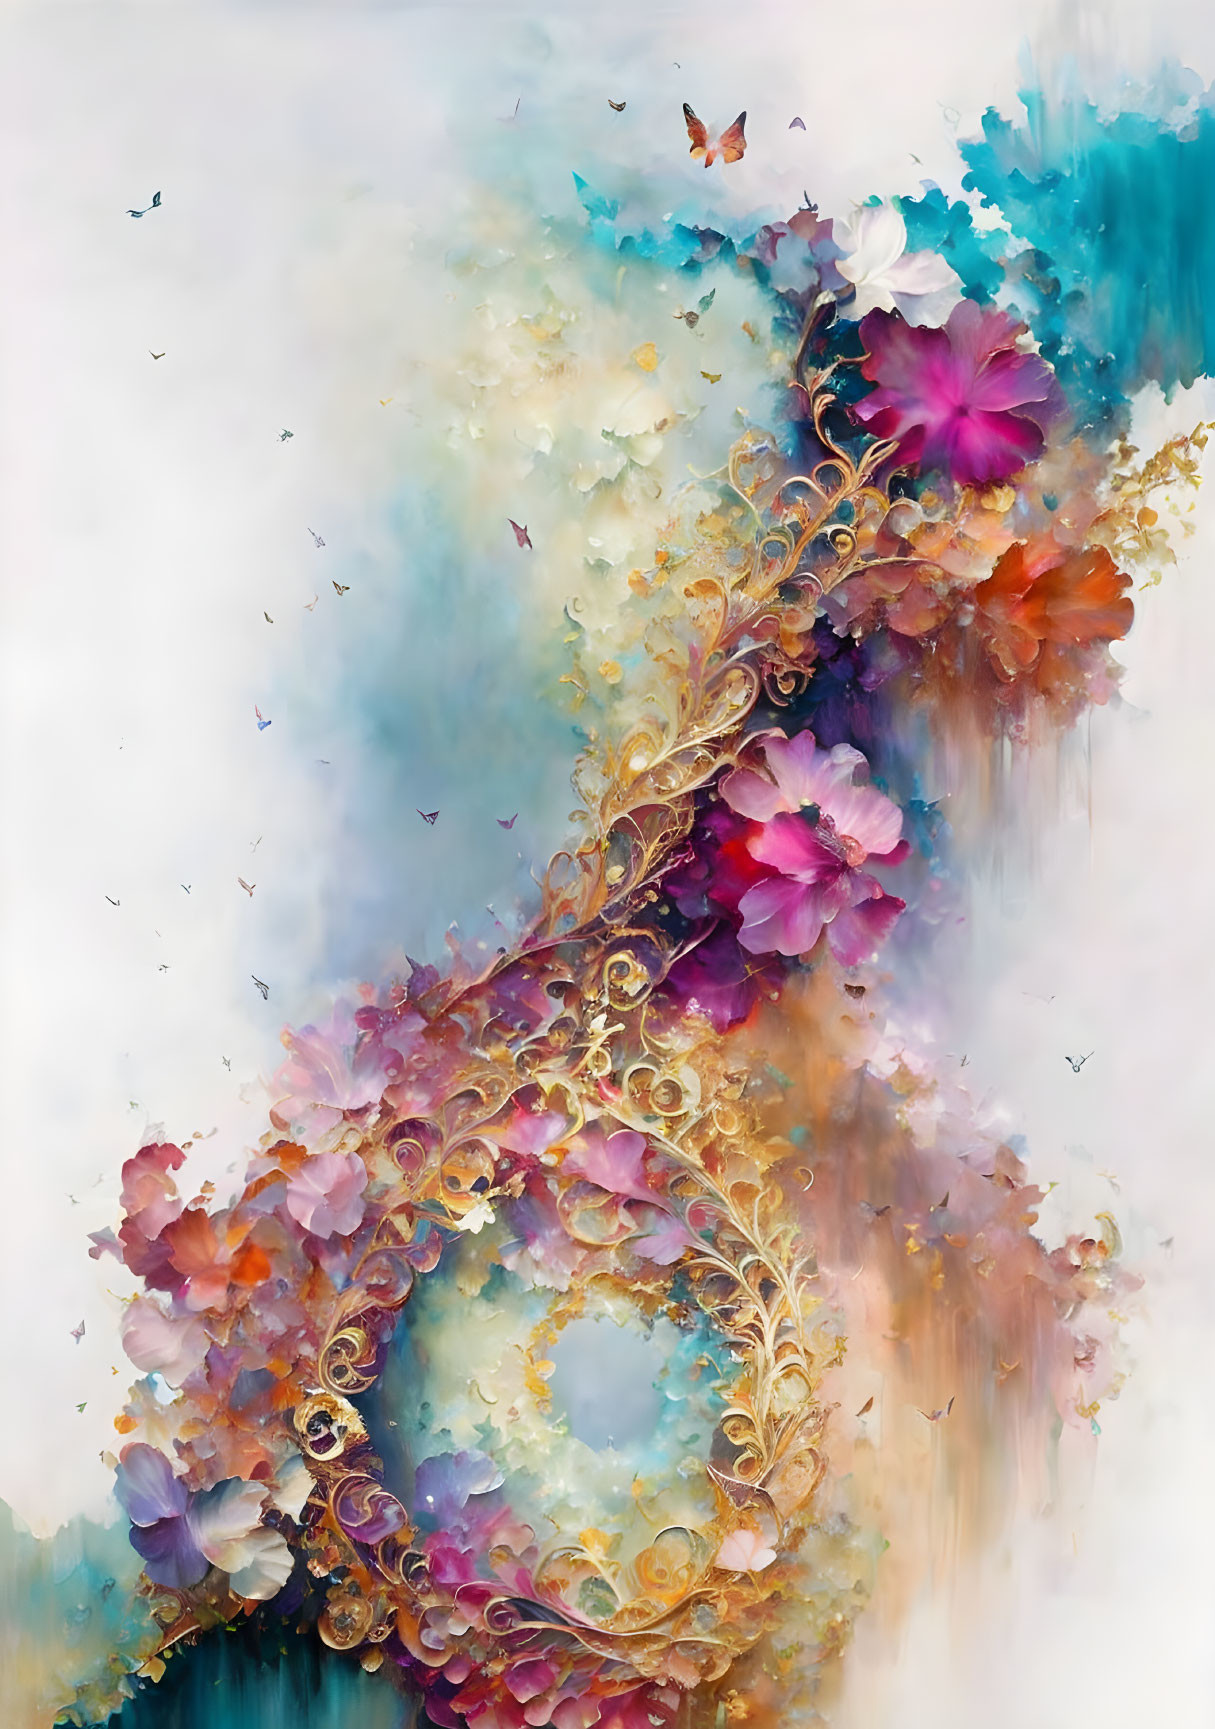 Colorful abstract art with ornate patterns, flowers, and butterflies